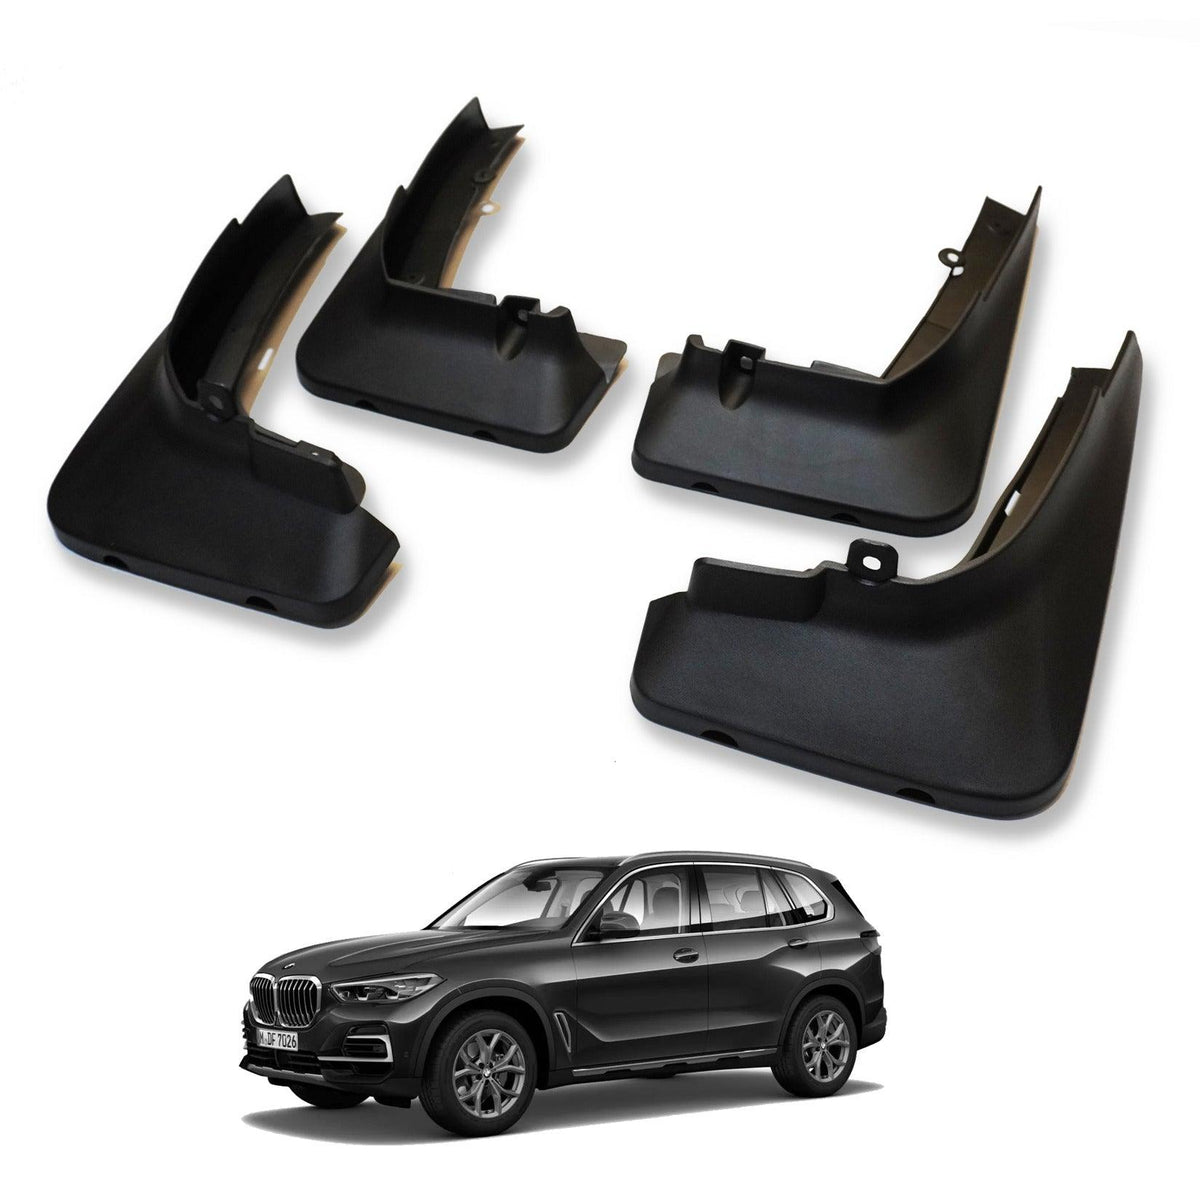 BMW X5 G05 2019 ON OE STYLE MUD FLAP SET - FOR STANDARD MODELS - Storm Xccessories2